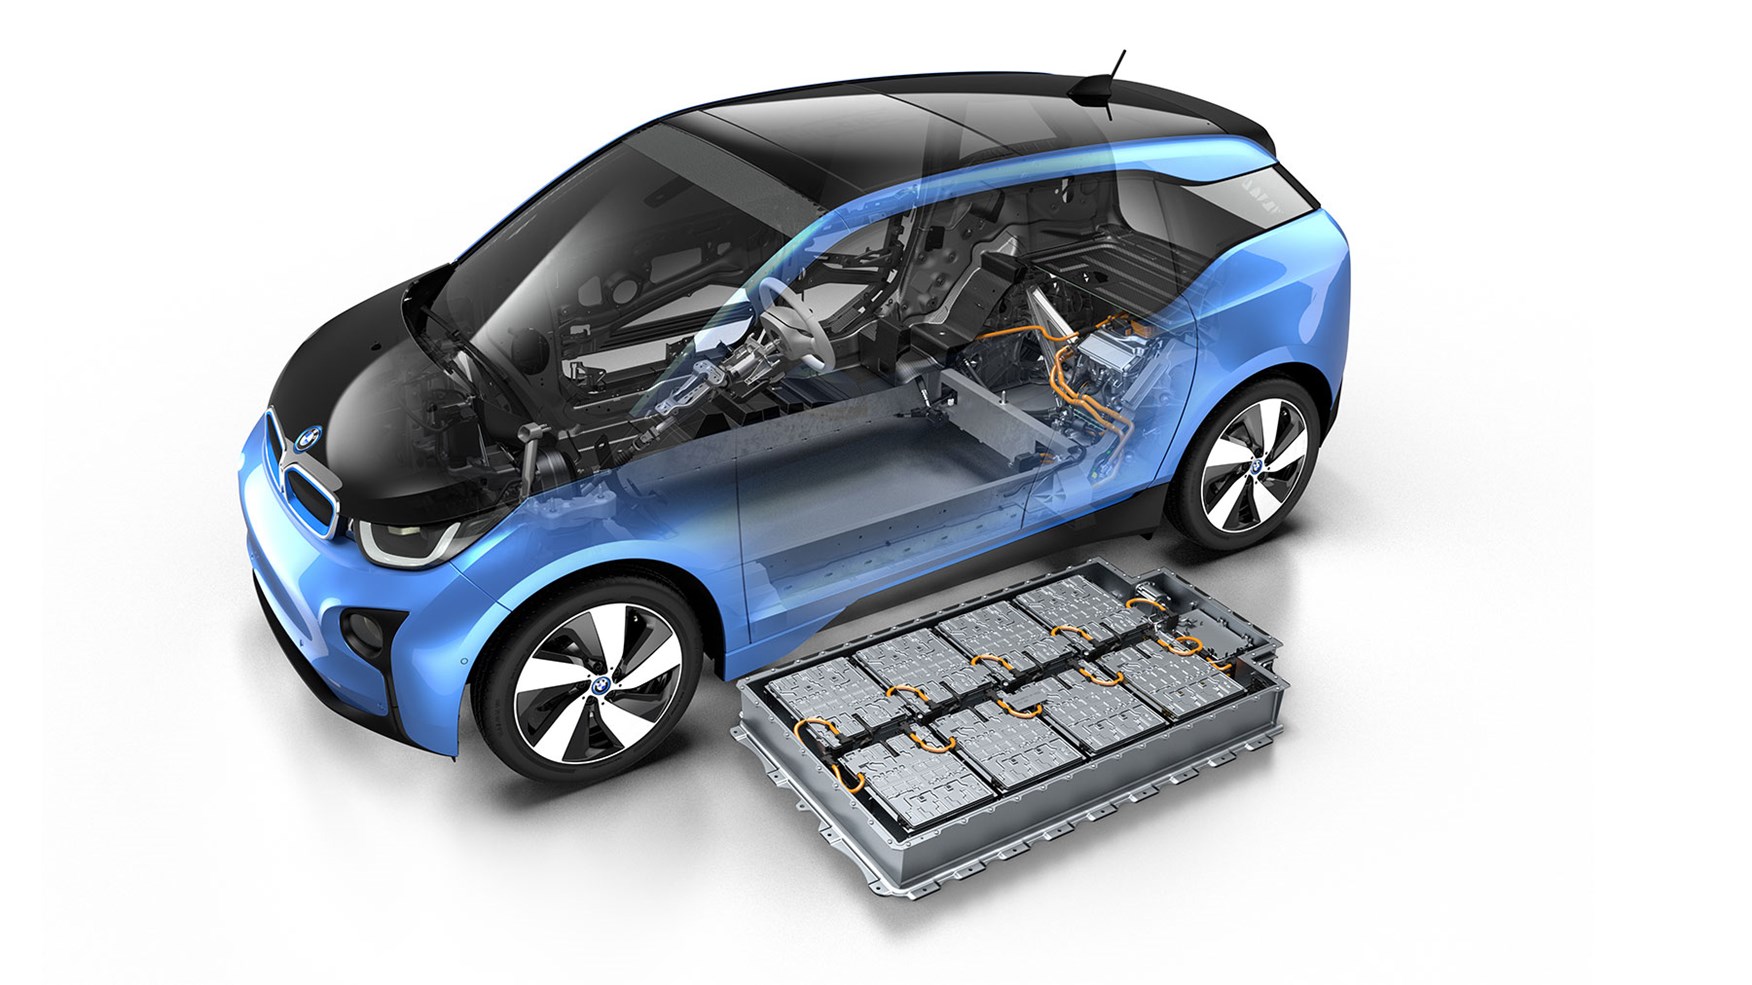 https://car-images.bauersecure.com/wp-images/3987/1752x1168/bmw_i3_battery_electric.jpg?mode=max&quality=90&scale=down